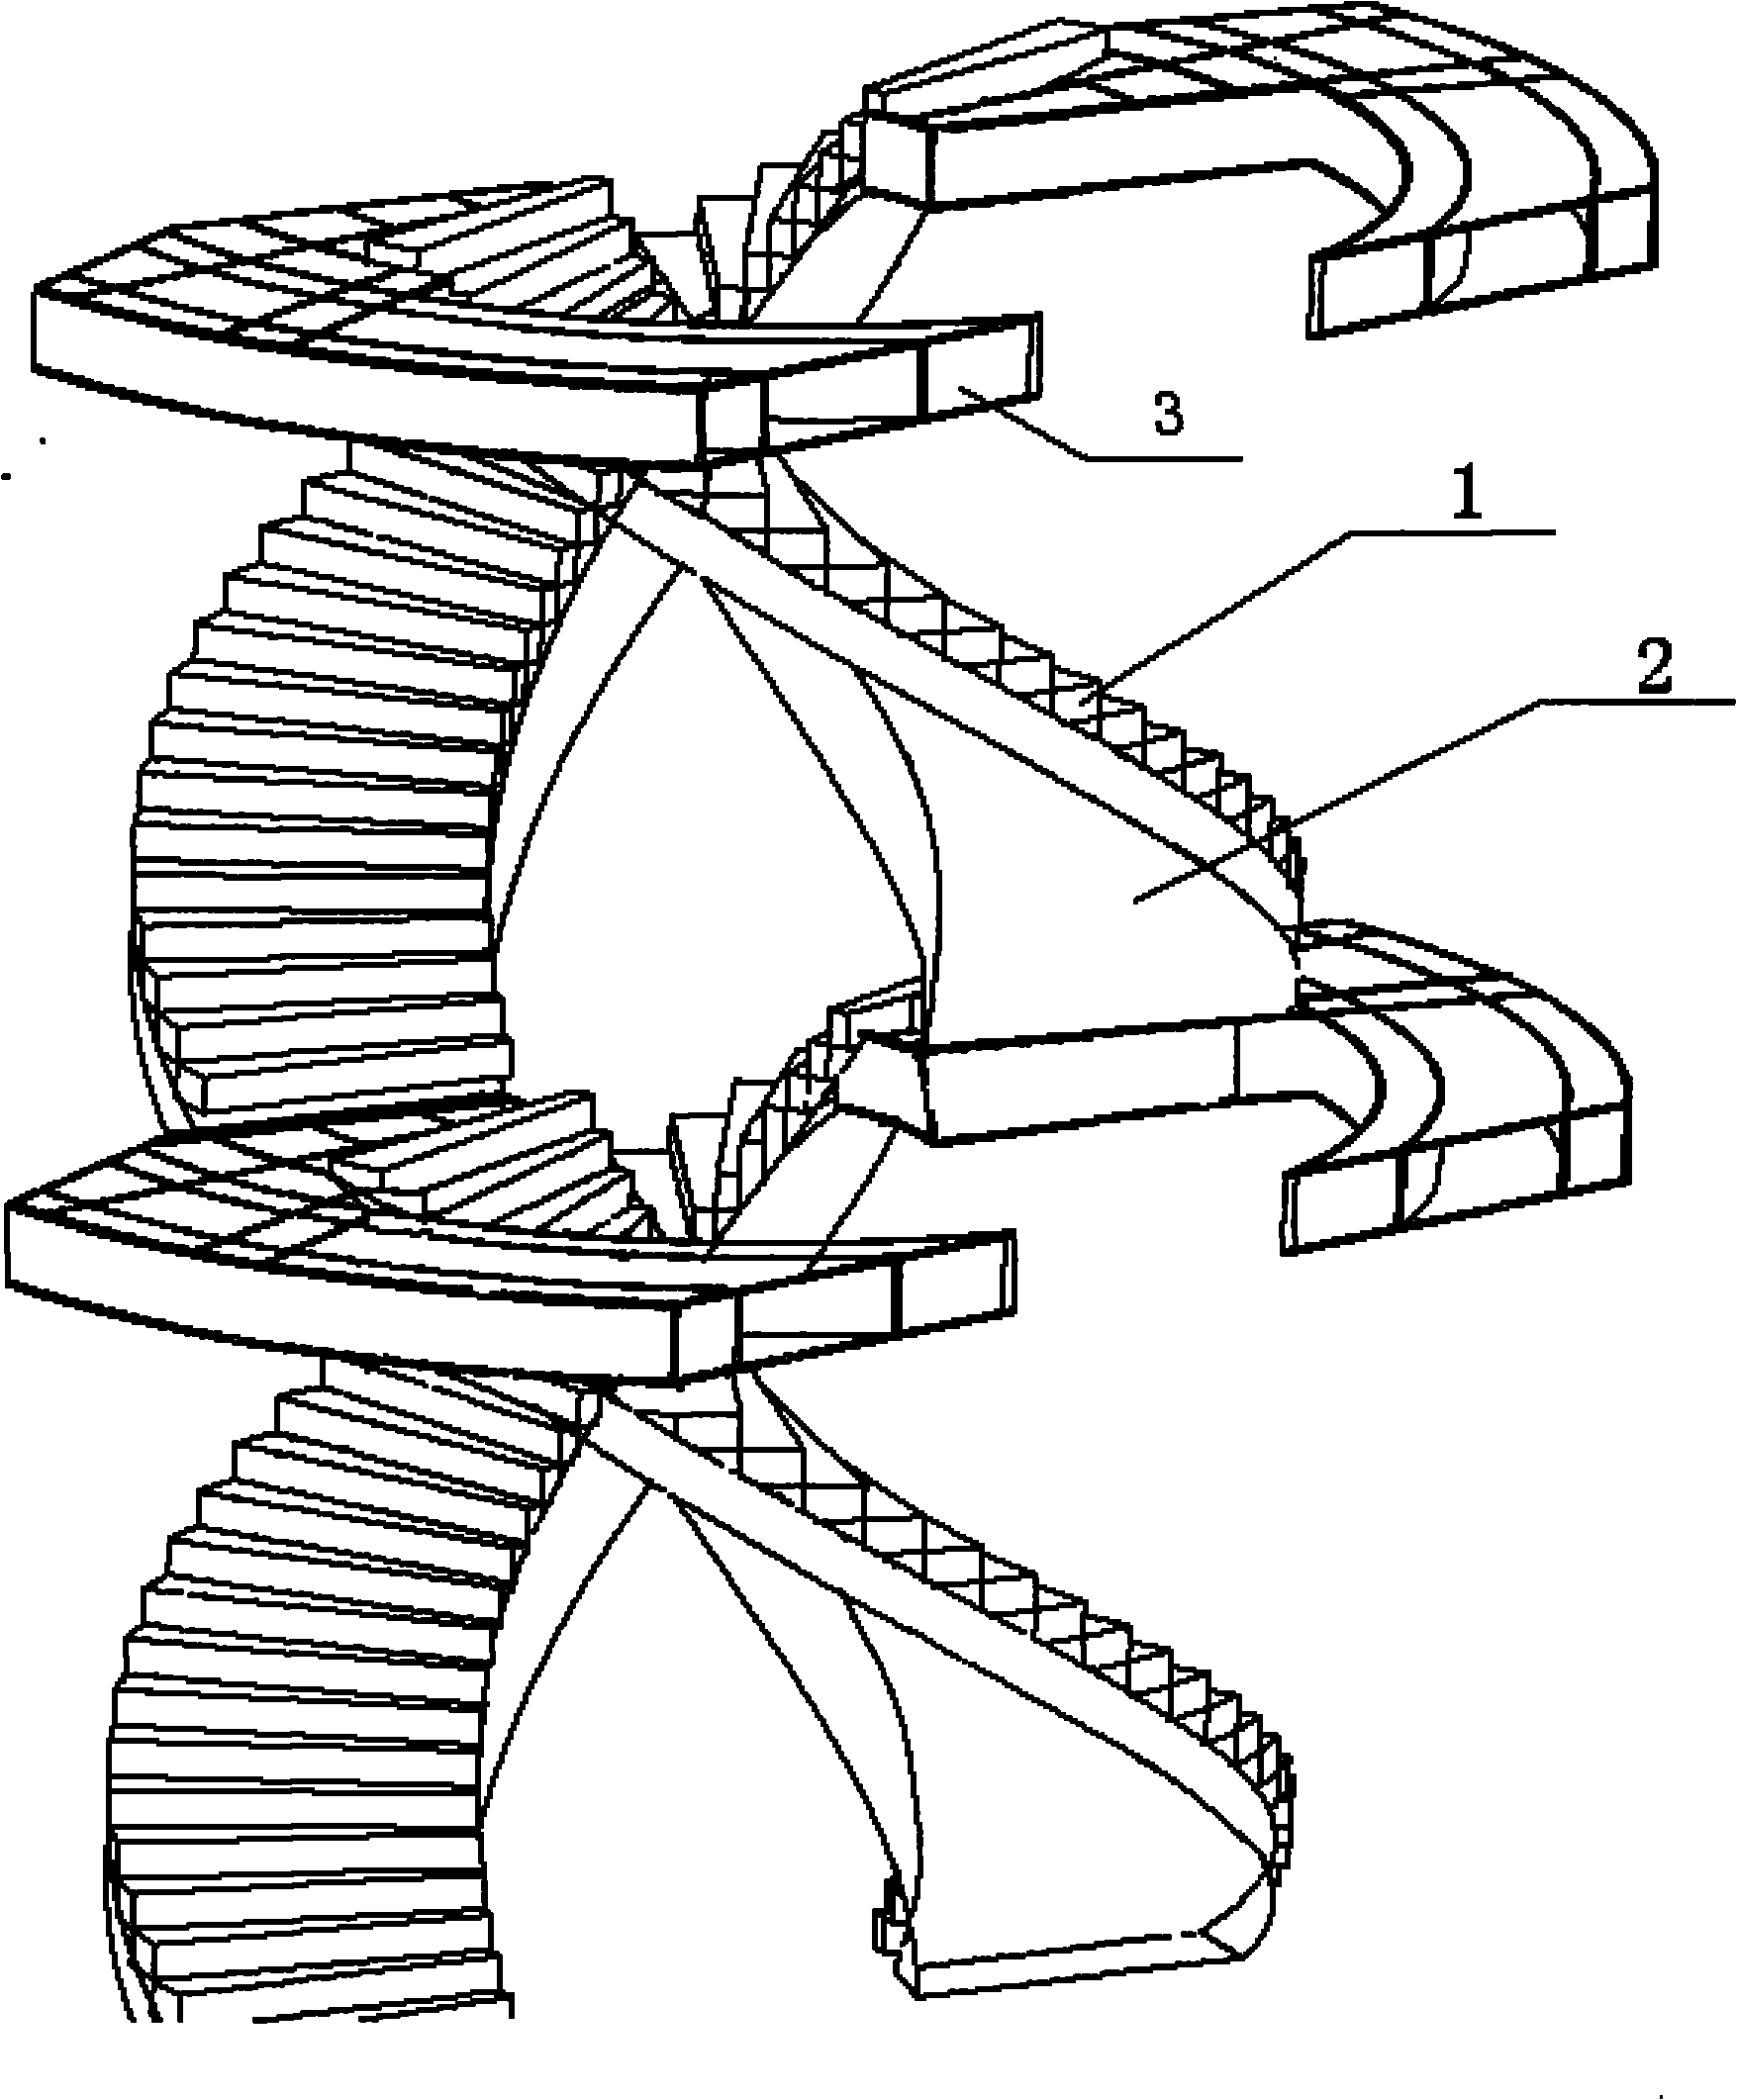 Method for manufacturing double-spiral steel staircase without middle standing pillar